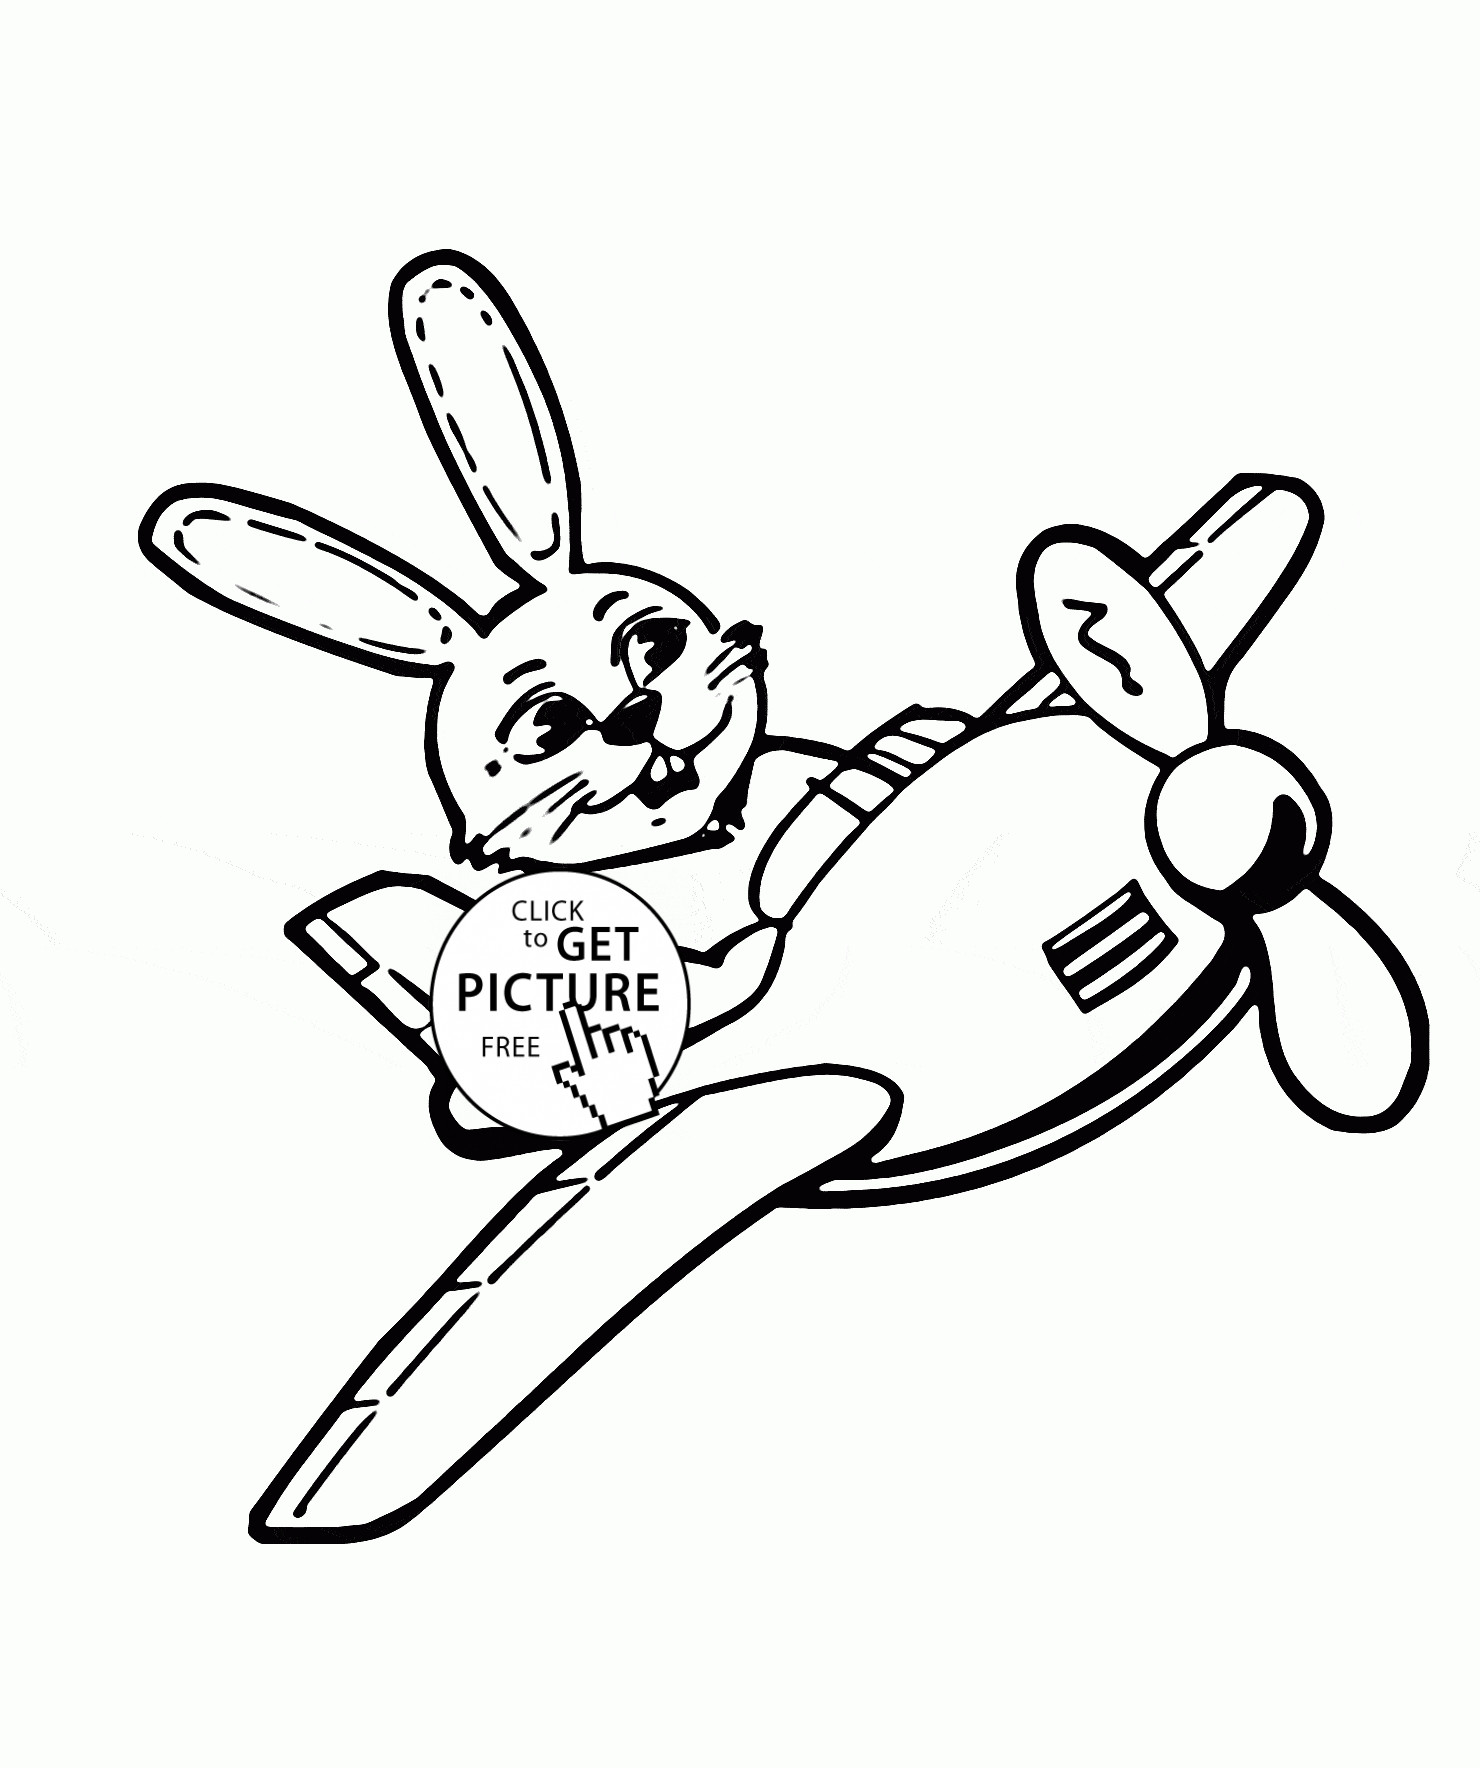 Airplane Coloring Pages For Preschool at GetColorings.com | Free